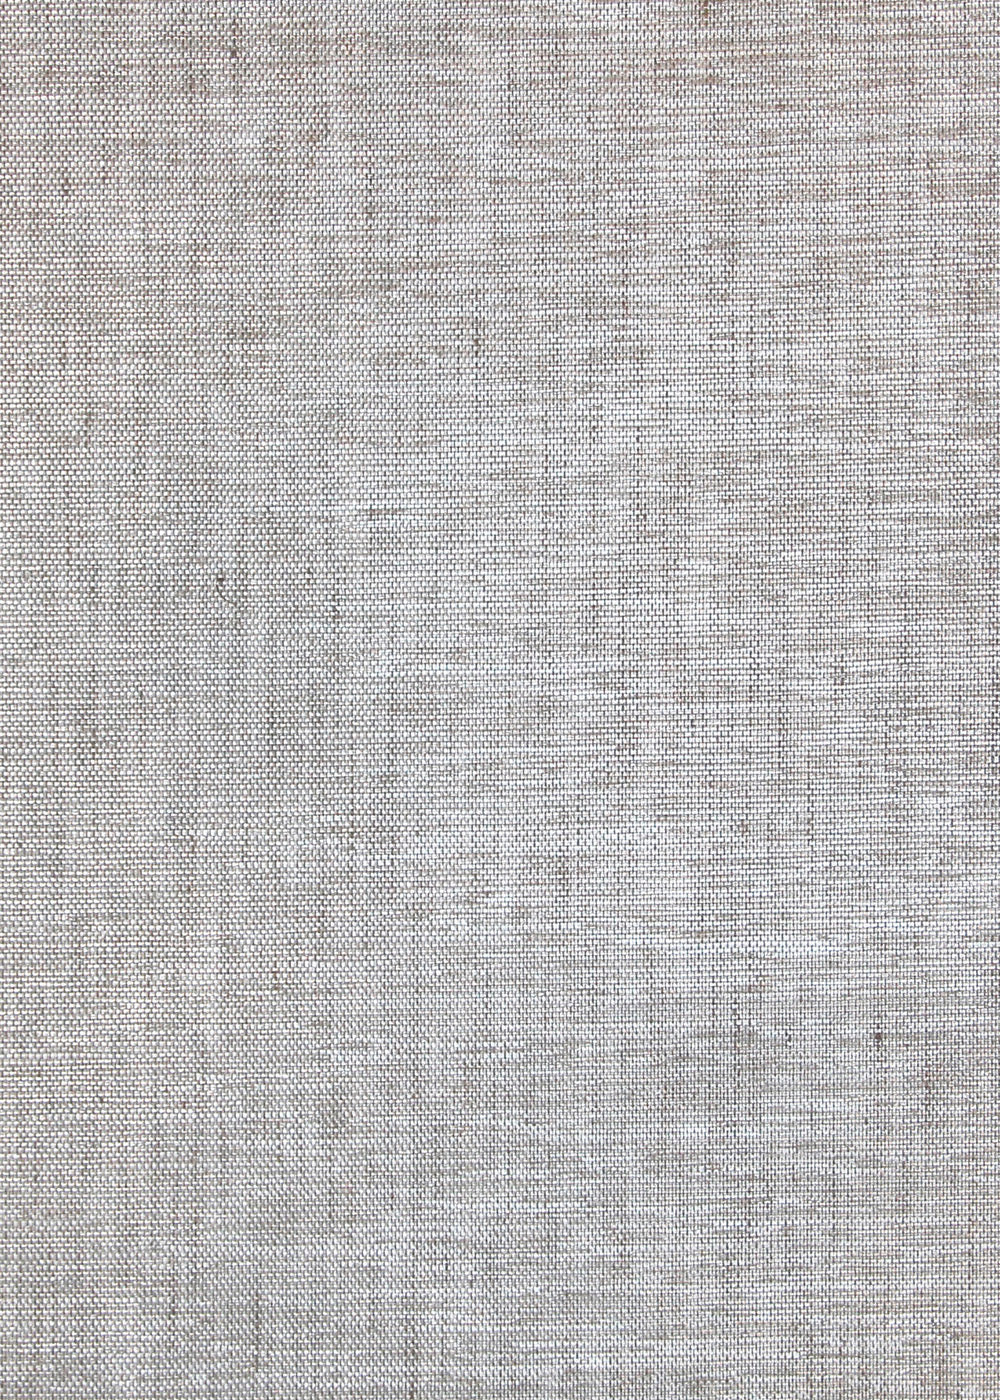 light taupe textured linen wallcovering